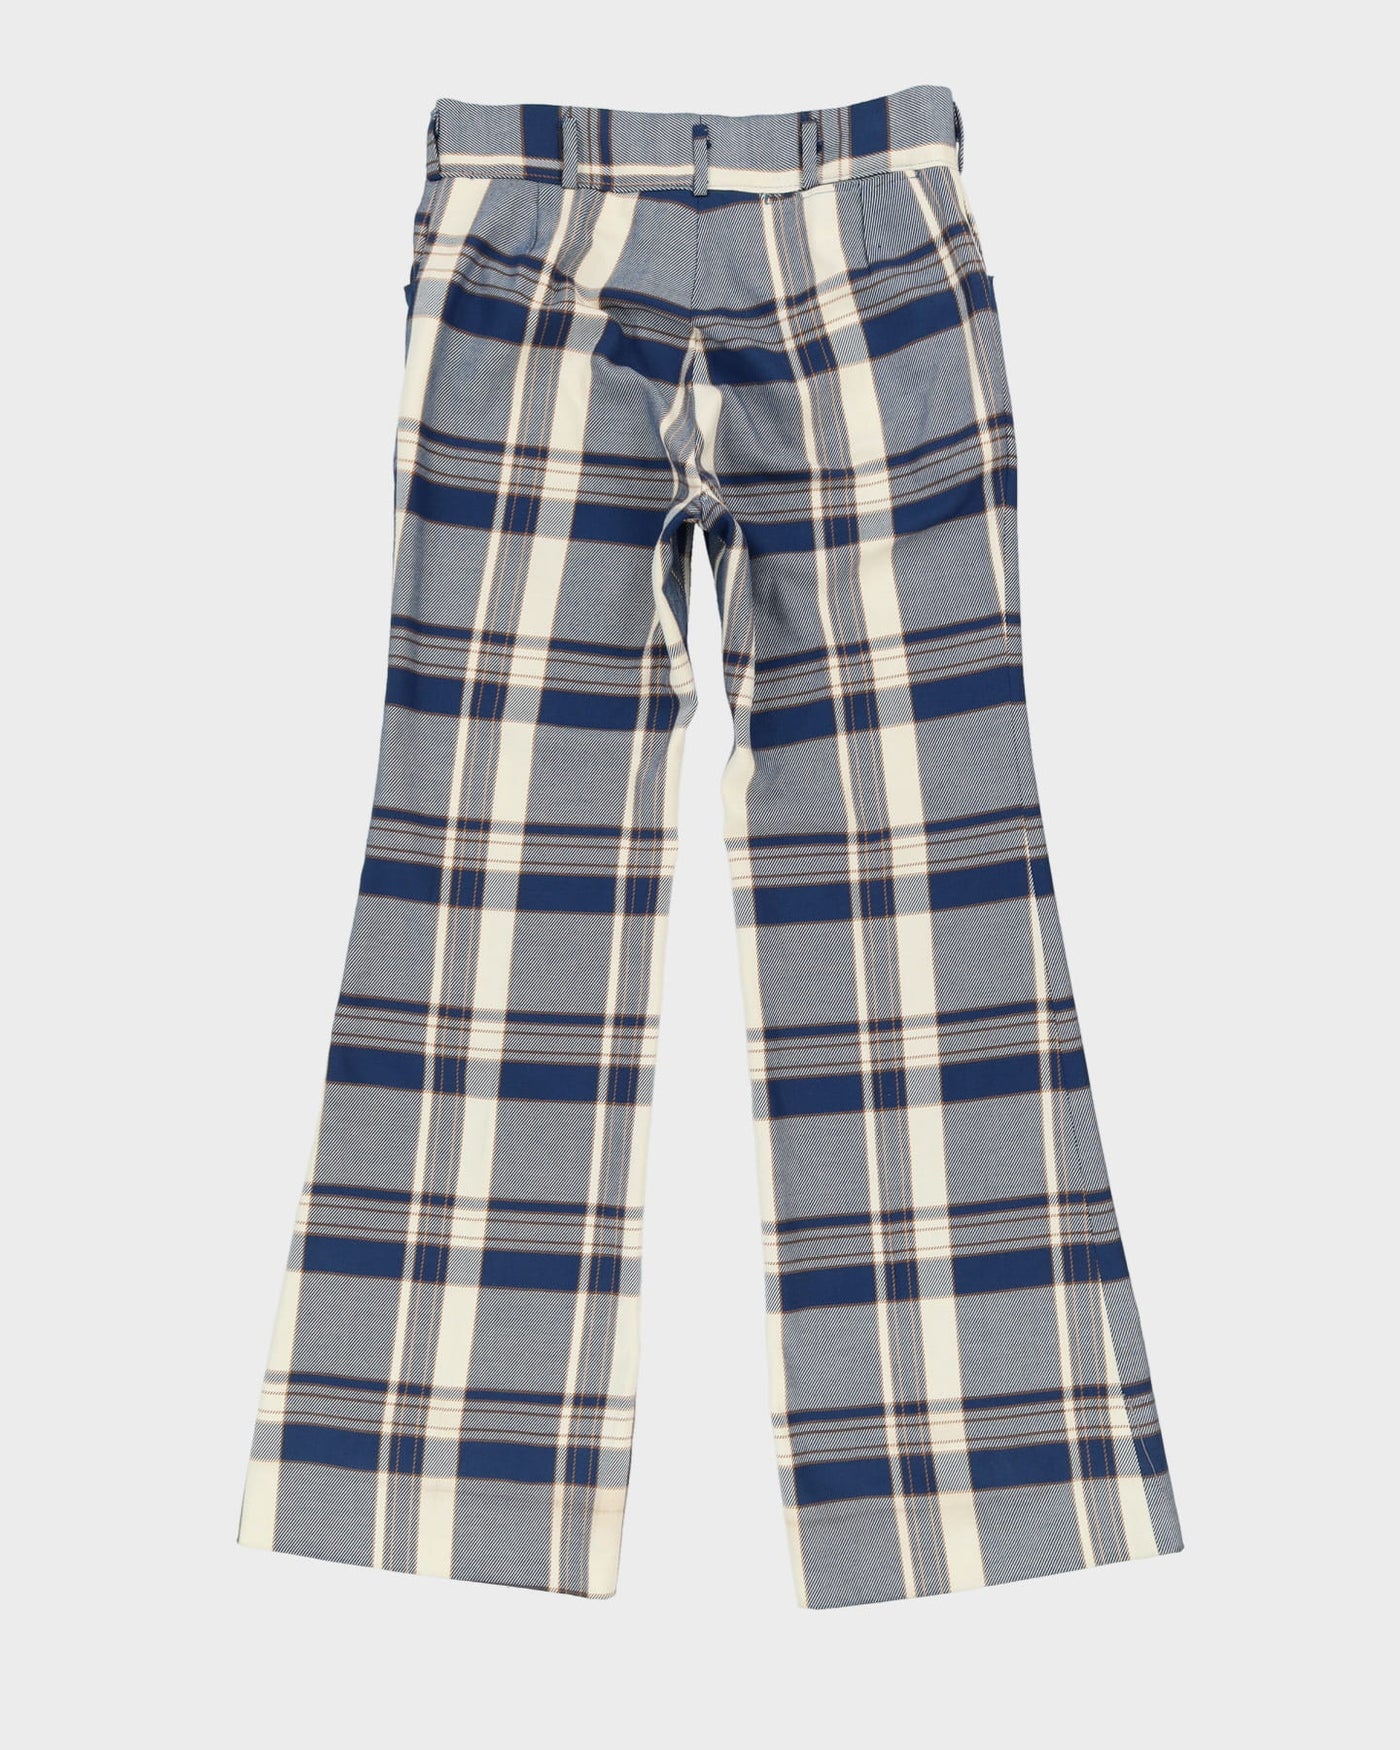 Vintage Blue Check Patterned Flared Trousers - W34 L34